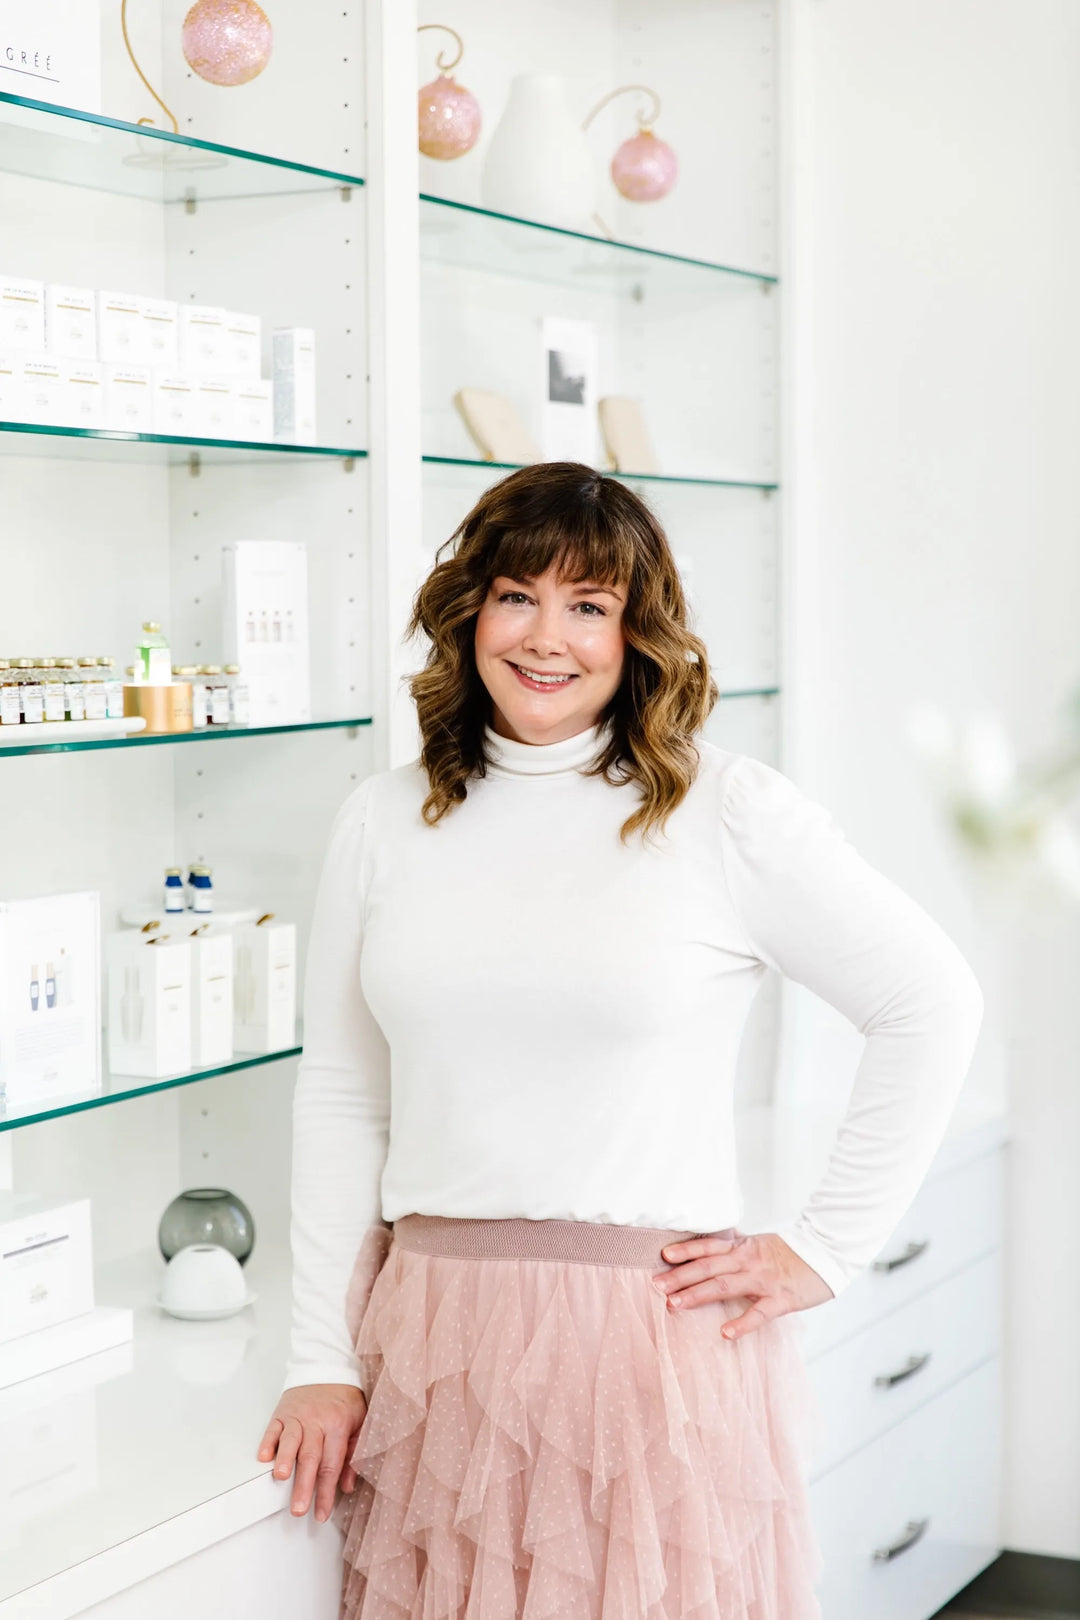 This is Lori of Skin and Tonic Raleigh - Esthetician and Skin Care Expert